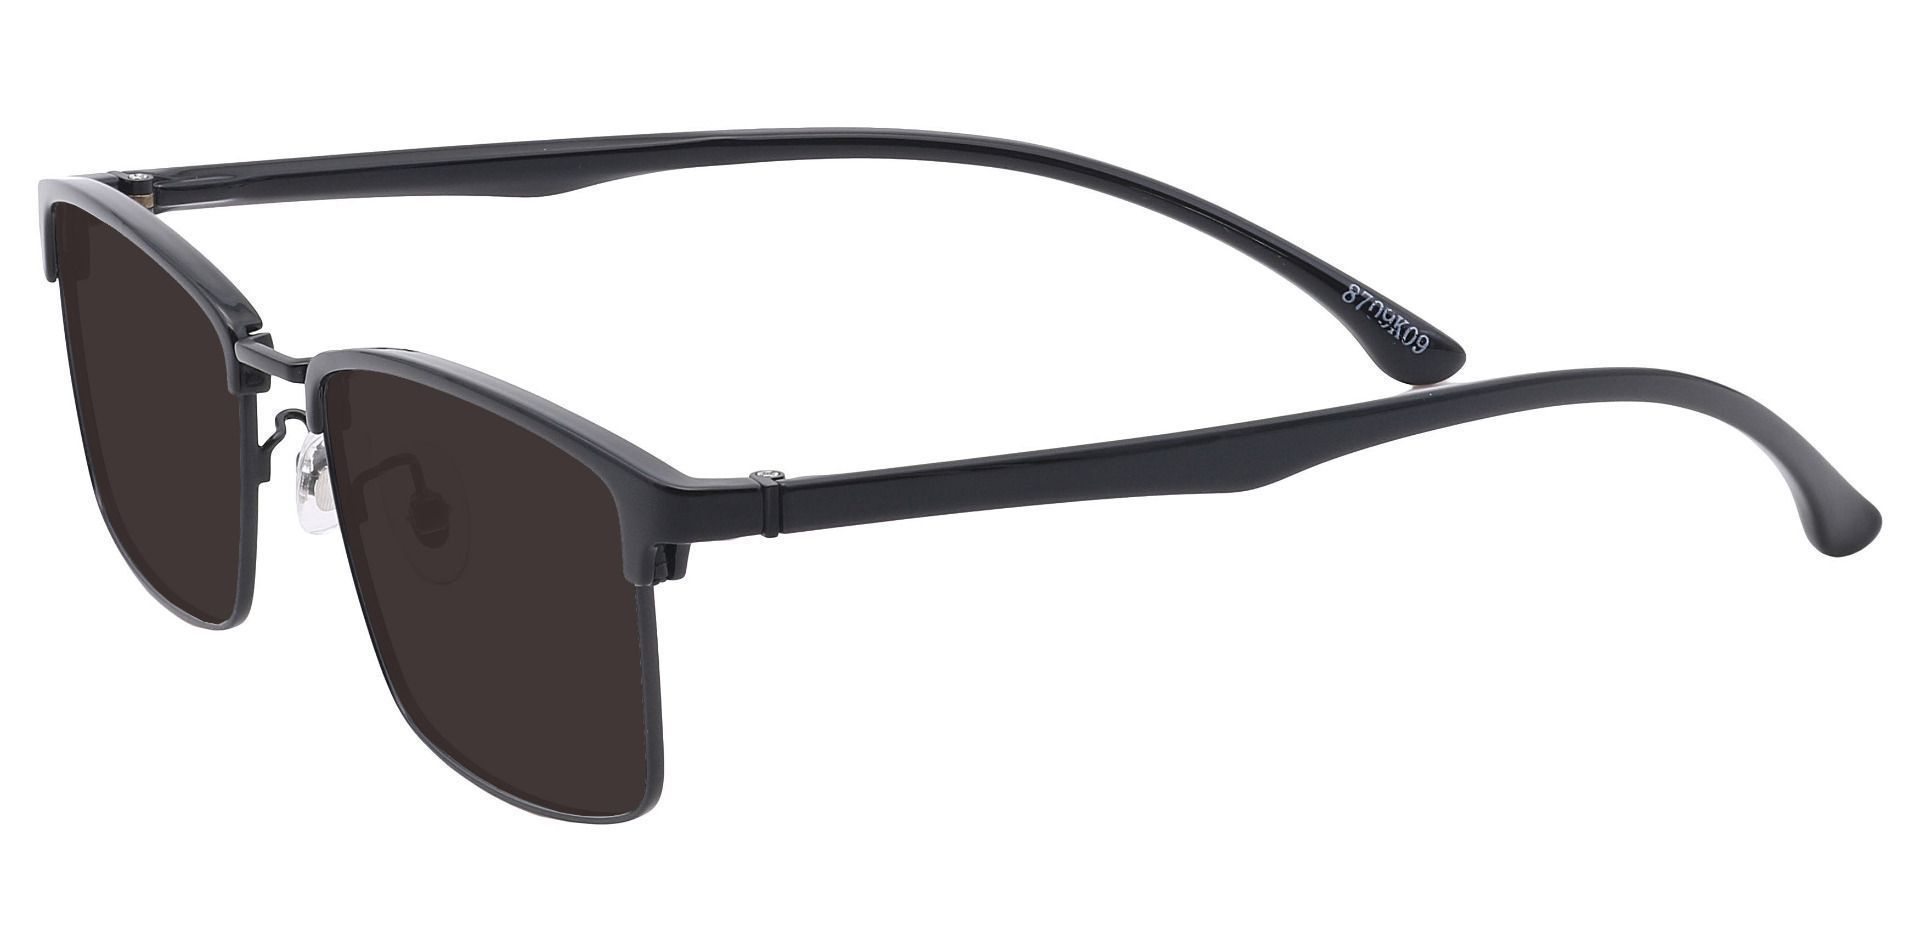 Young Browline Non-Rx Sunglasses - Black Frame With Gray Lenses